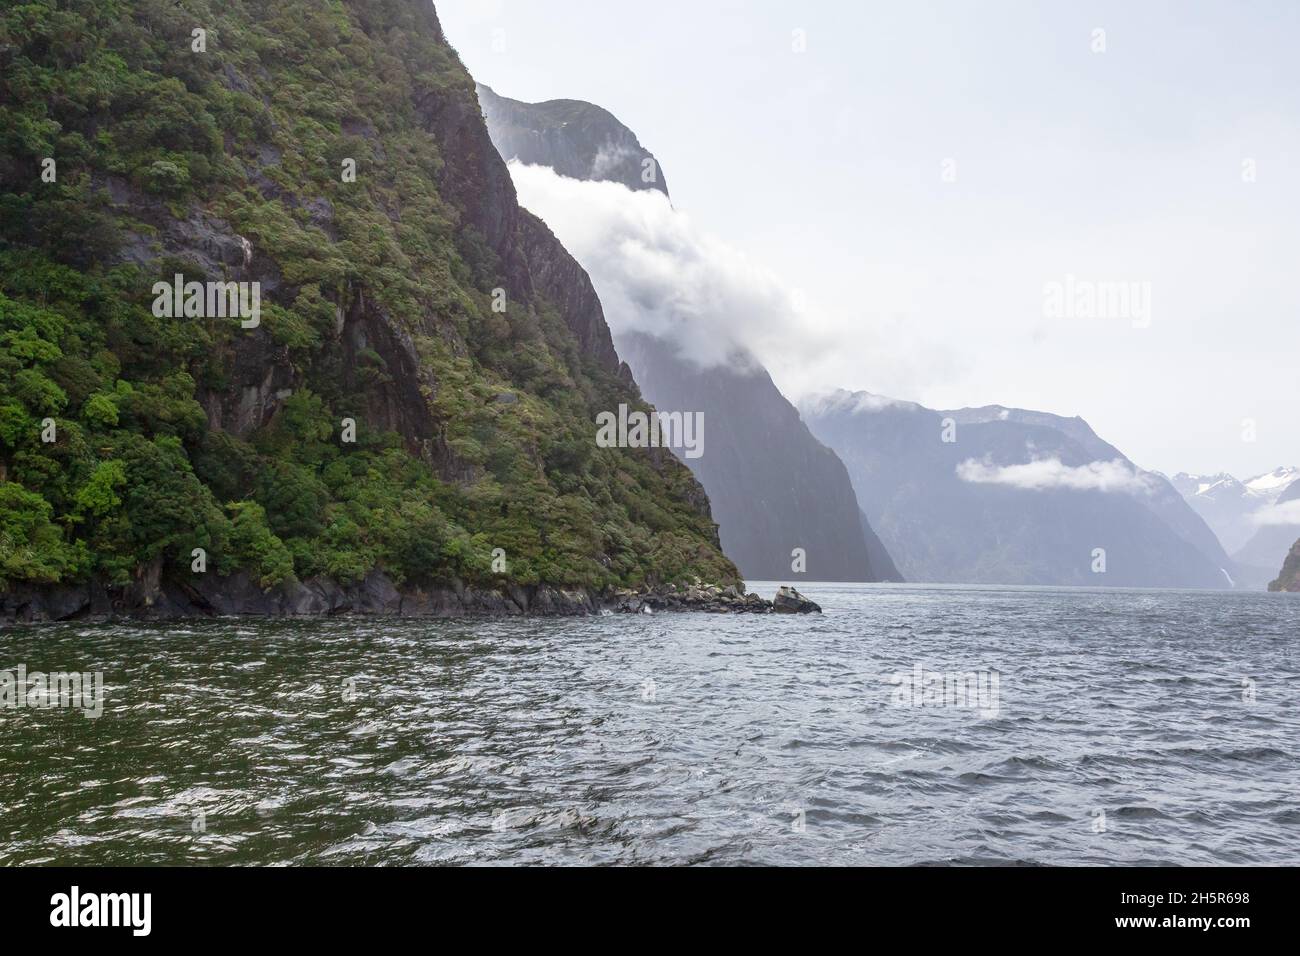 Steep slopes, covered with greenery on the banks of the fjord. FiordLand National Park. New Zealand Stock Photo